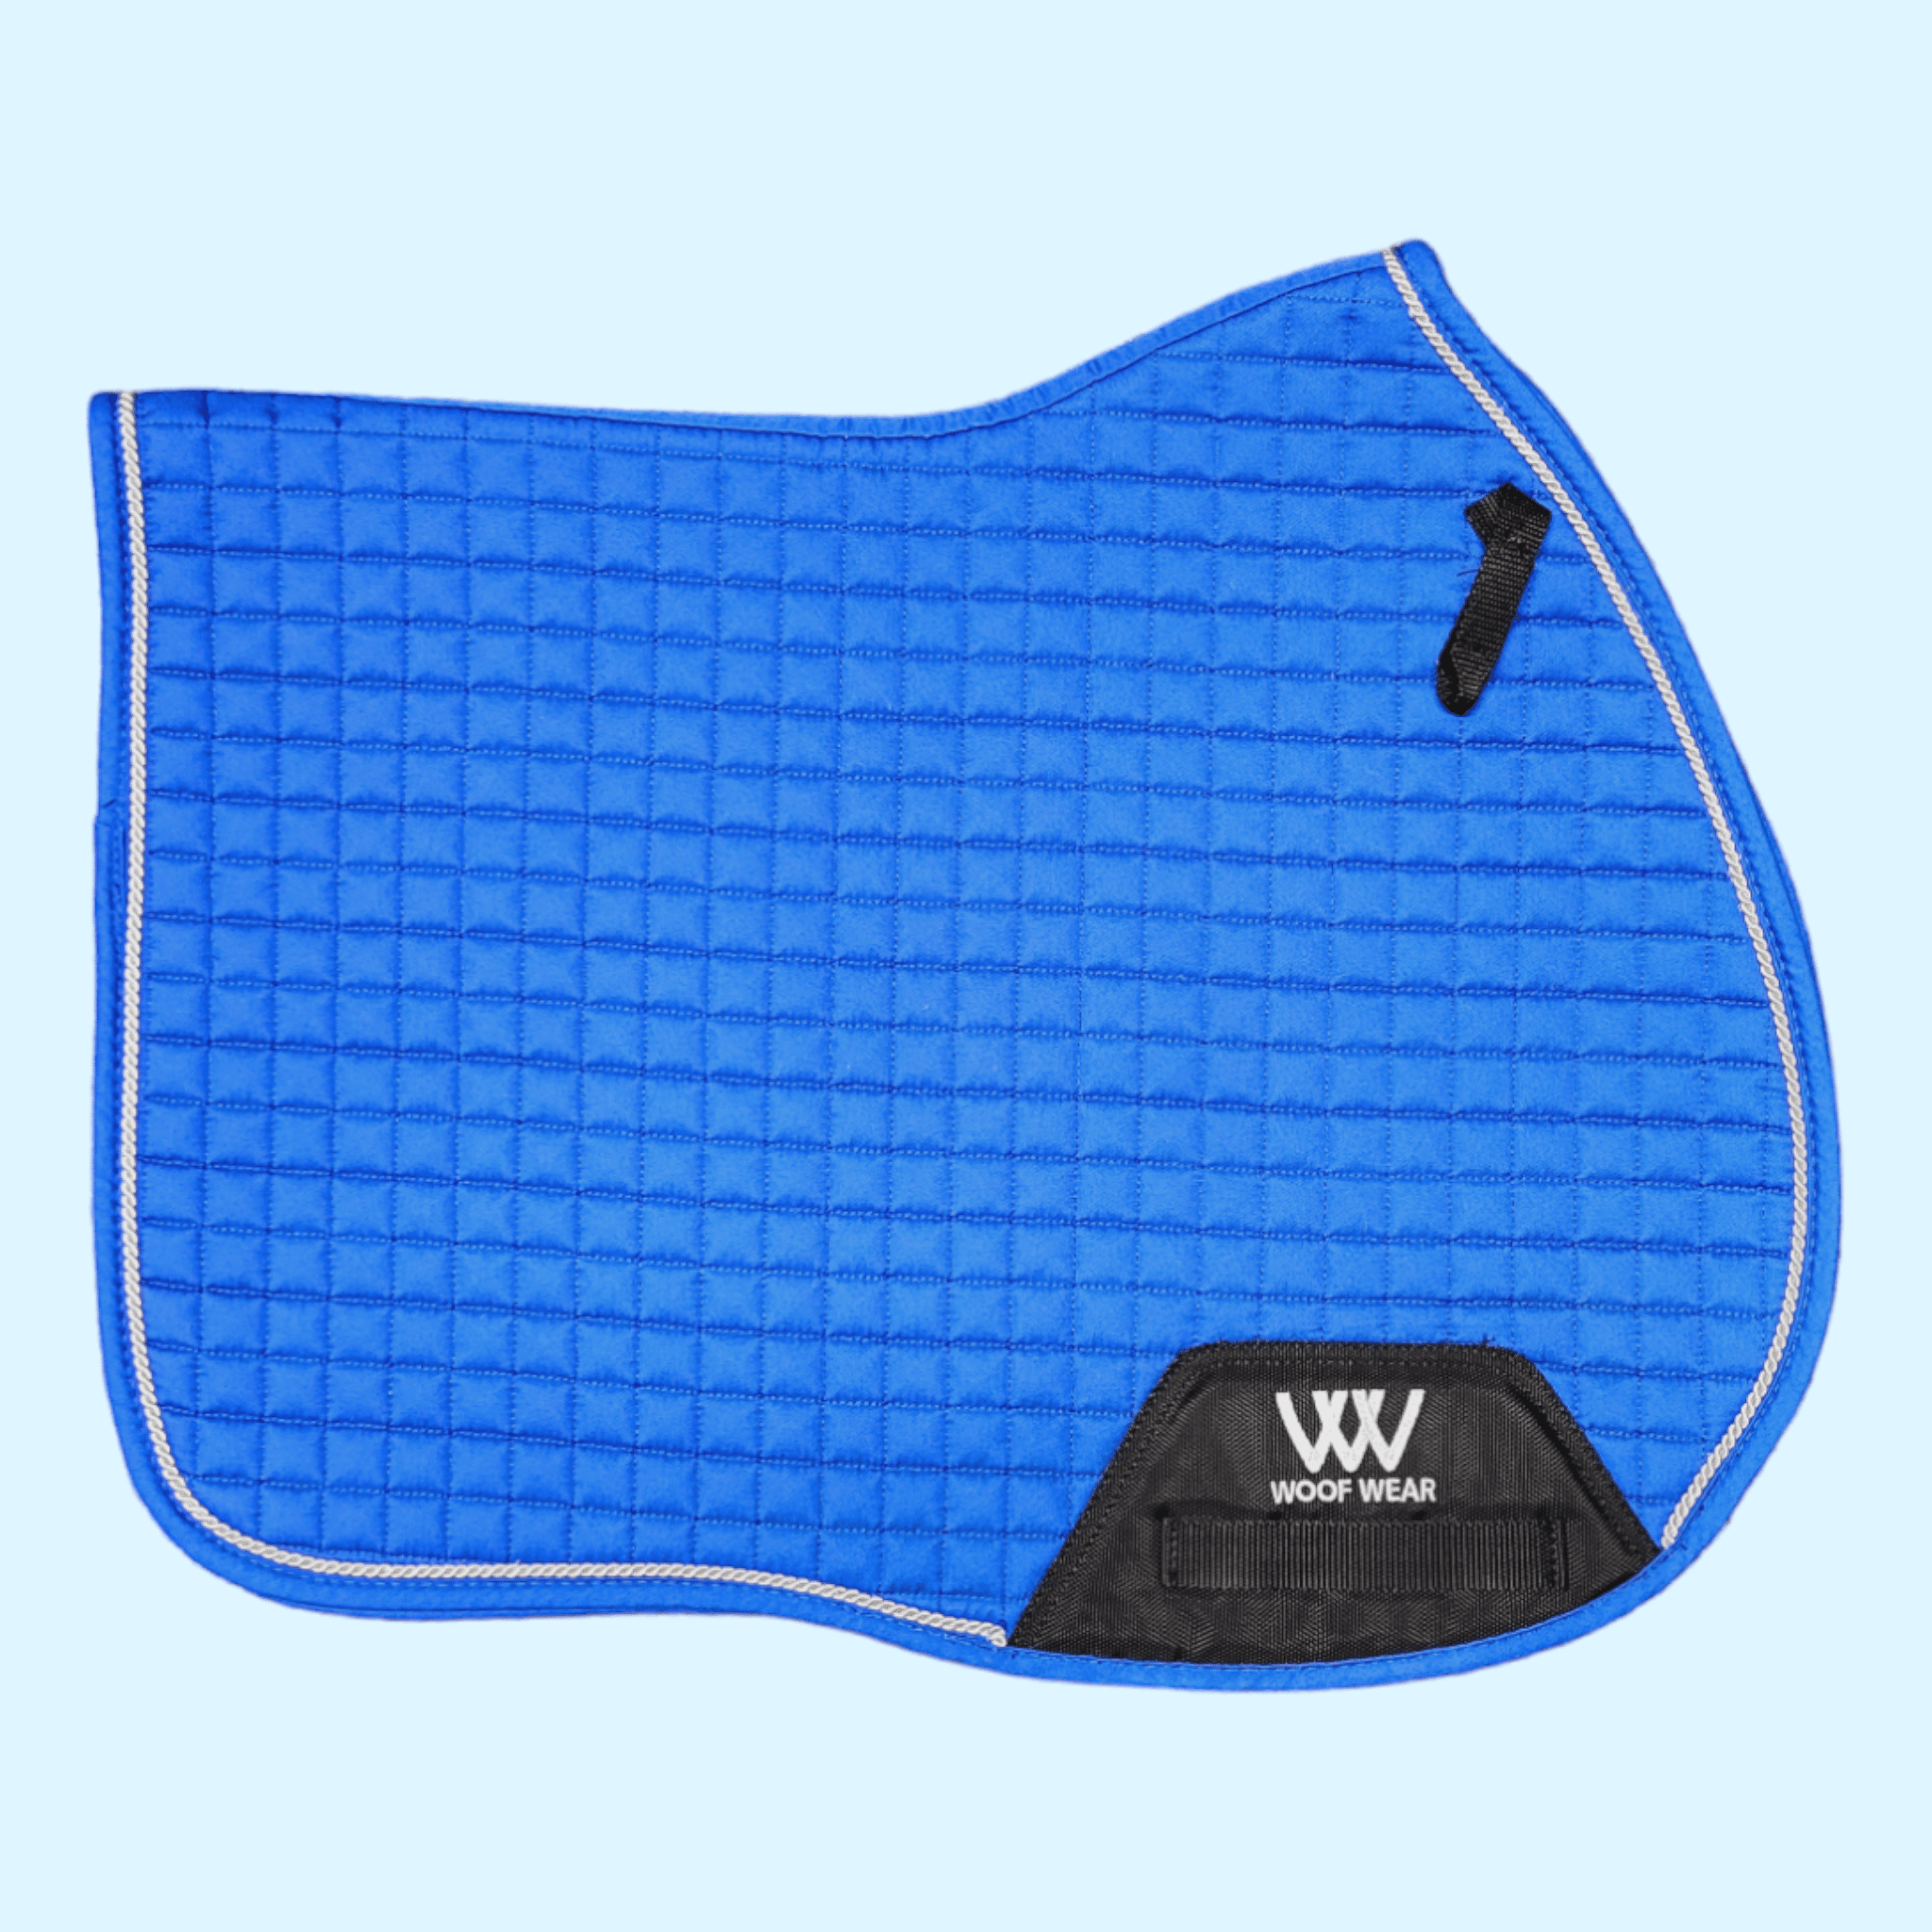 Woof Wear GP Saddle Cloth in Electric Blue - Full - Equine Exchange Tack Shop